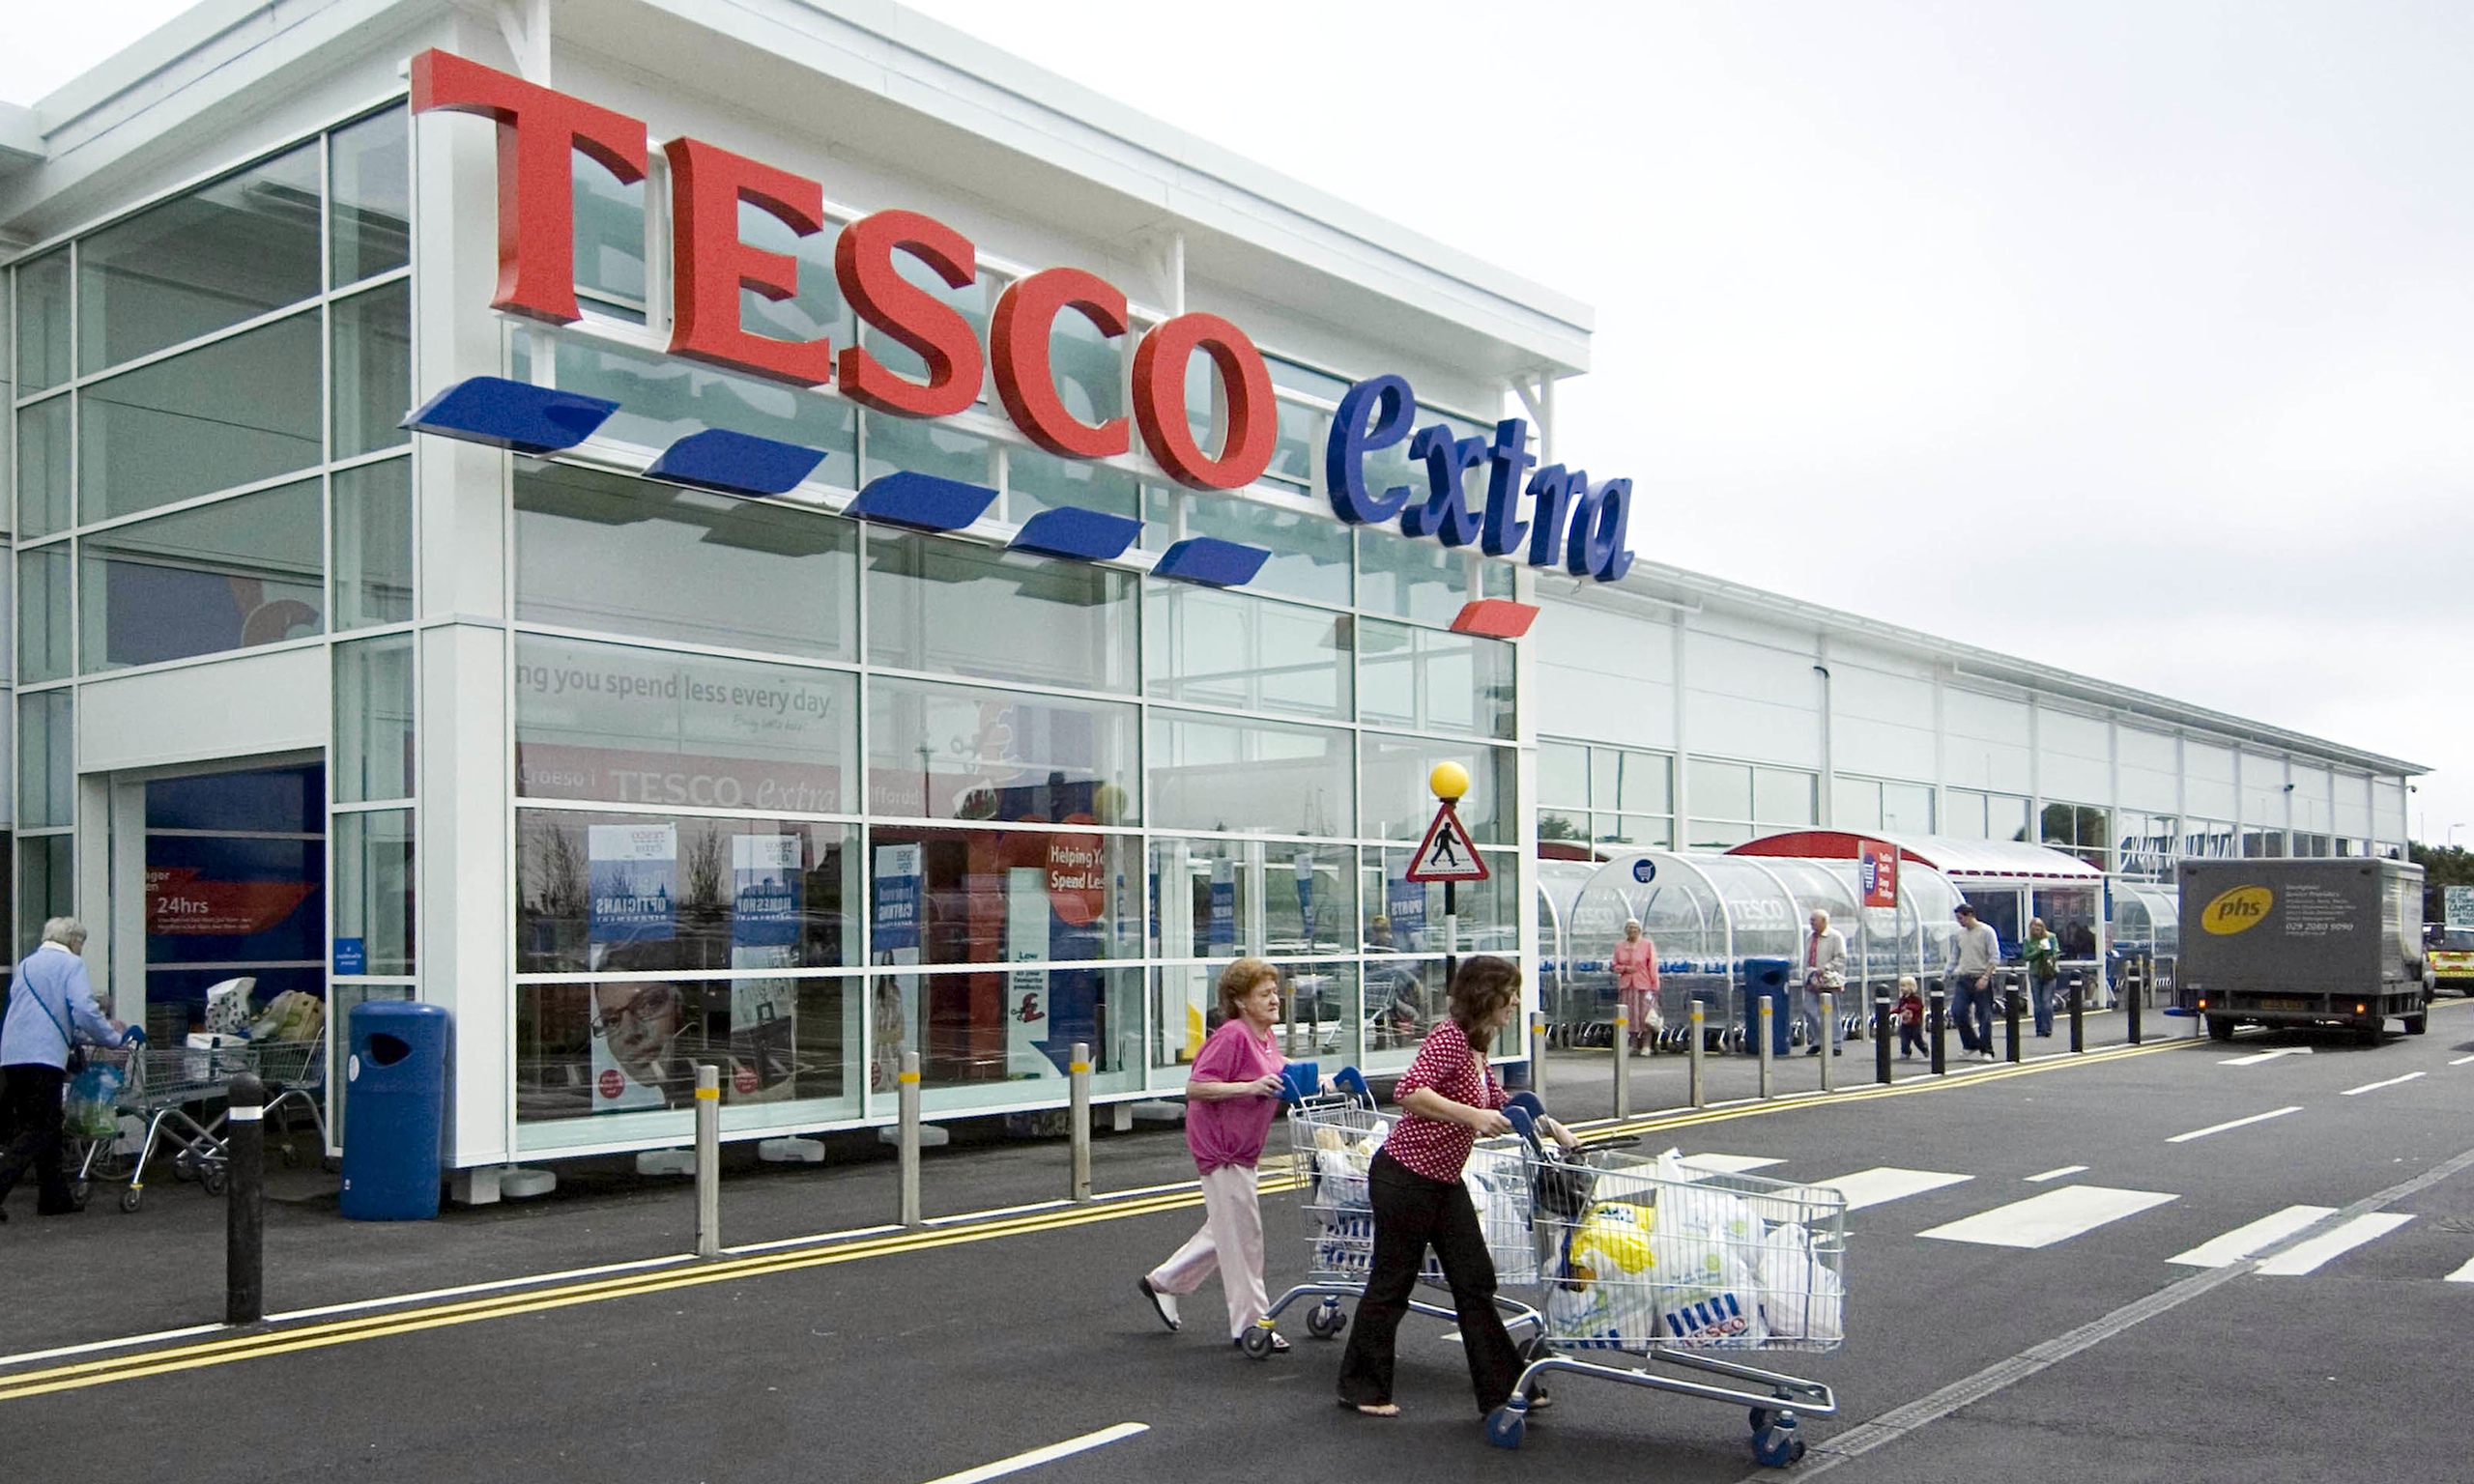 Tesco Extra store in Haverfordwest